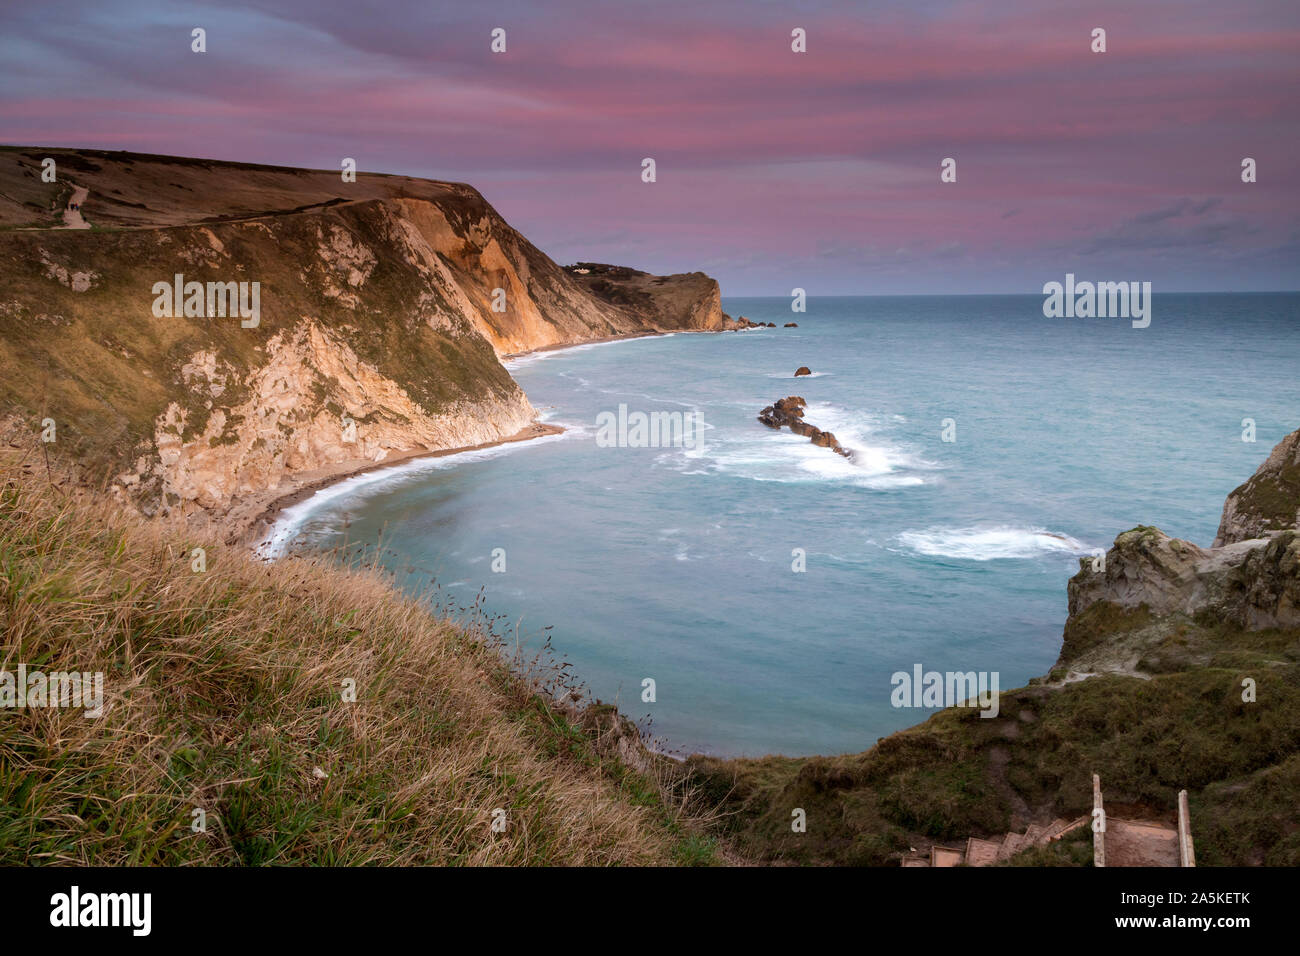 Man o War Cove and St Oswald’s Cove, Viewed from the South West Coast Path above Durdle Door, Lulworth, Dorset, UK Stock Photo